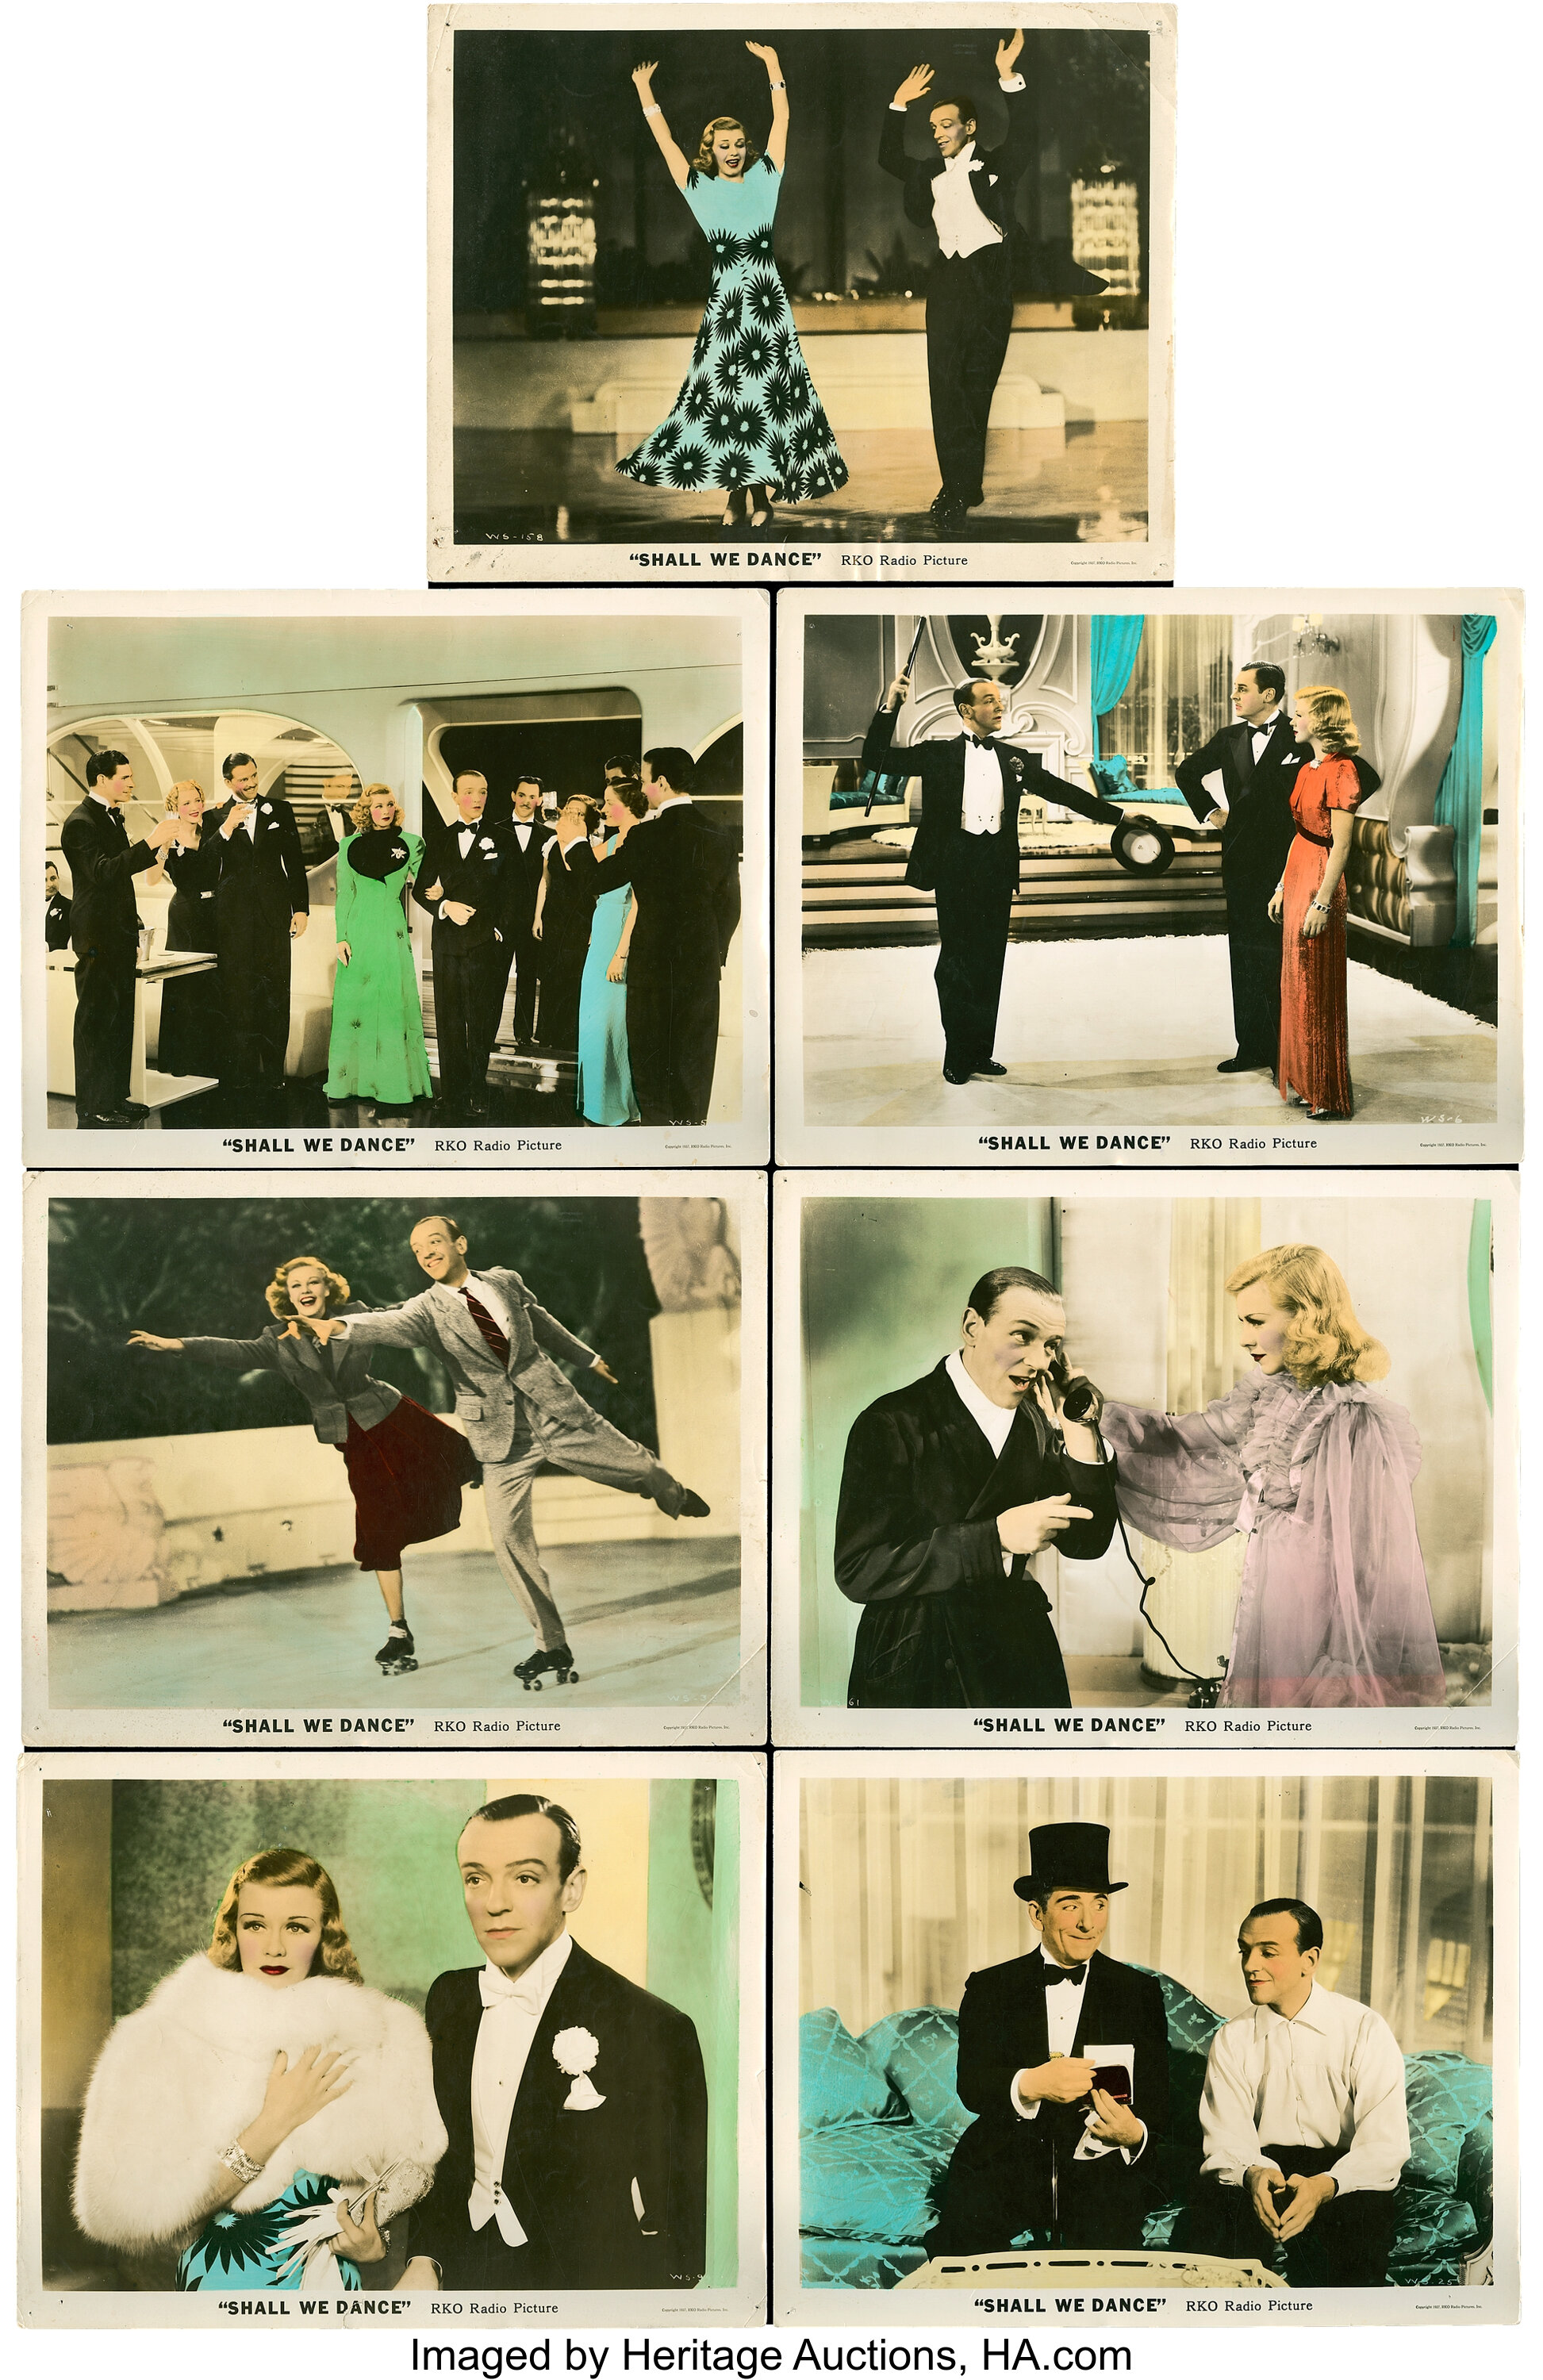 Shall We Dance Rko 1937 Deluxe Color Glos Lobby Cards 7 11 Lot 262 Heritage Auctions